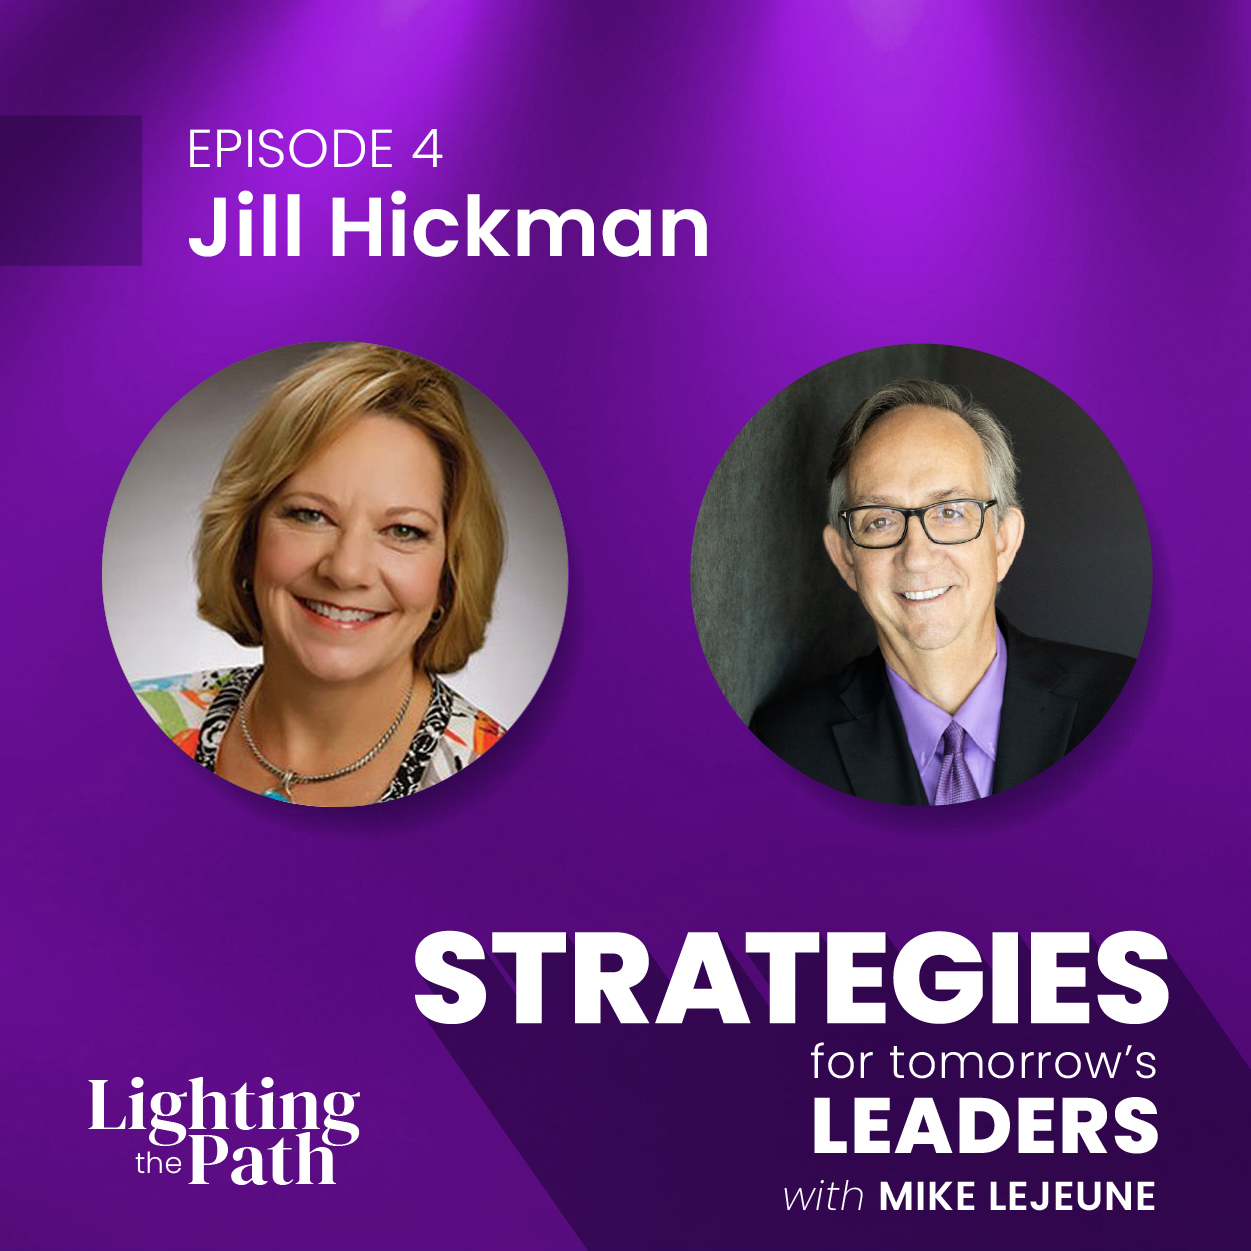 Podcast Episode 4 Jill Hickman and Mike Lejeune